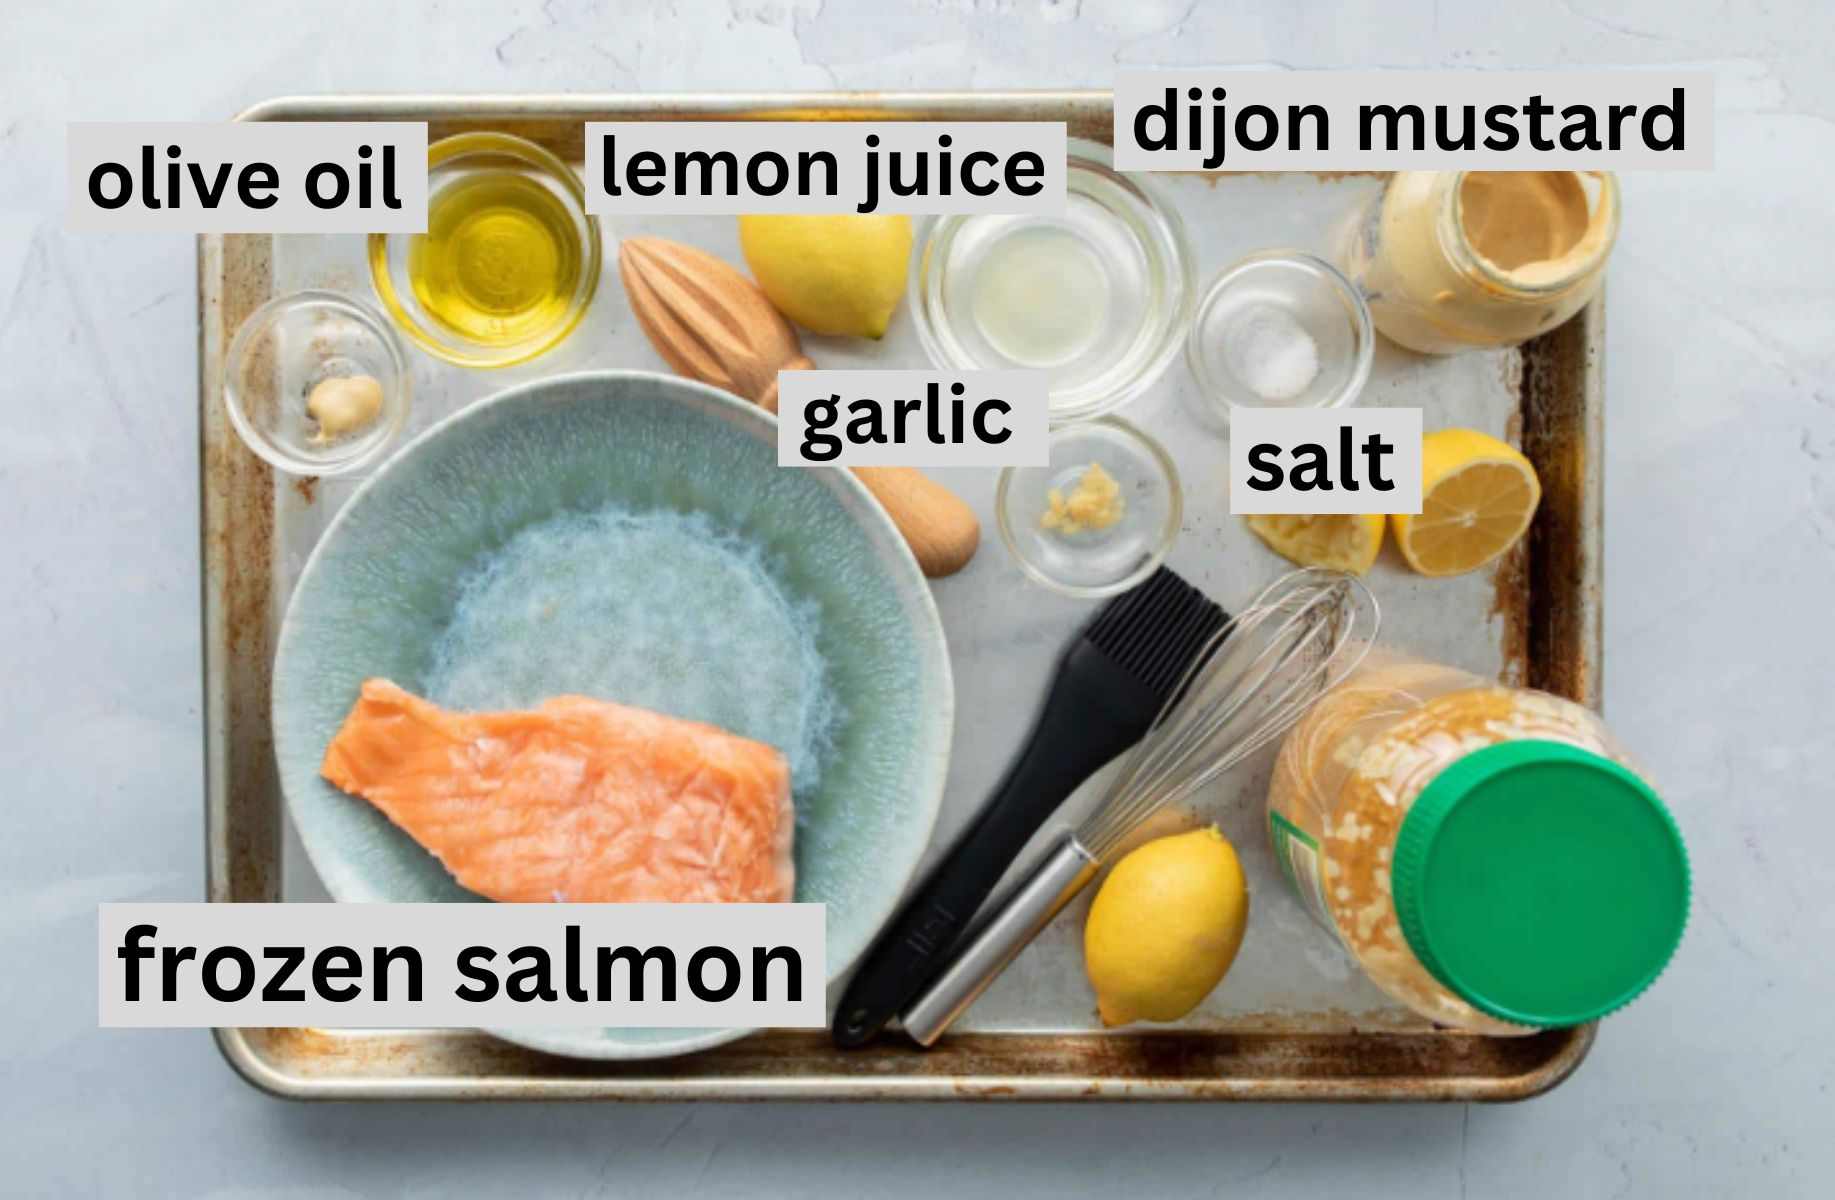 baking sheet with salmon filet on plate, lemons, and other ingredients on it